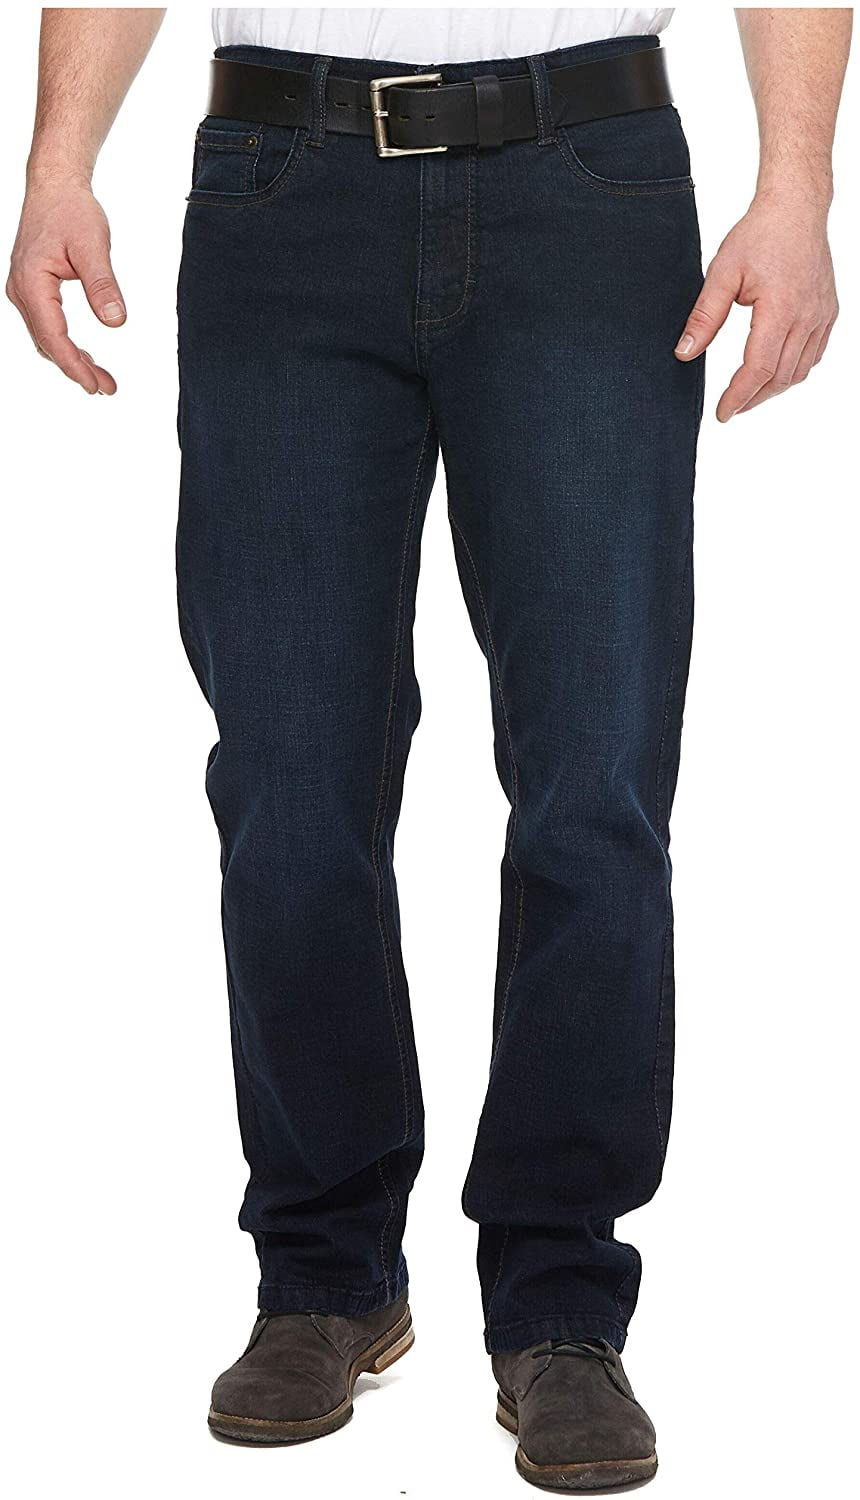 Regular and Big and Tall Sizes Straight Leg Stretch Jeans for Men Urban Star Mens Jeans Relaxed Fit